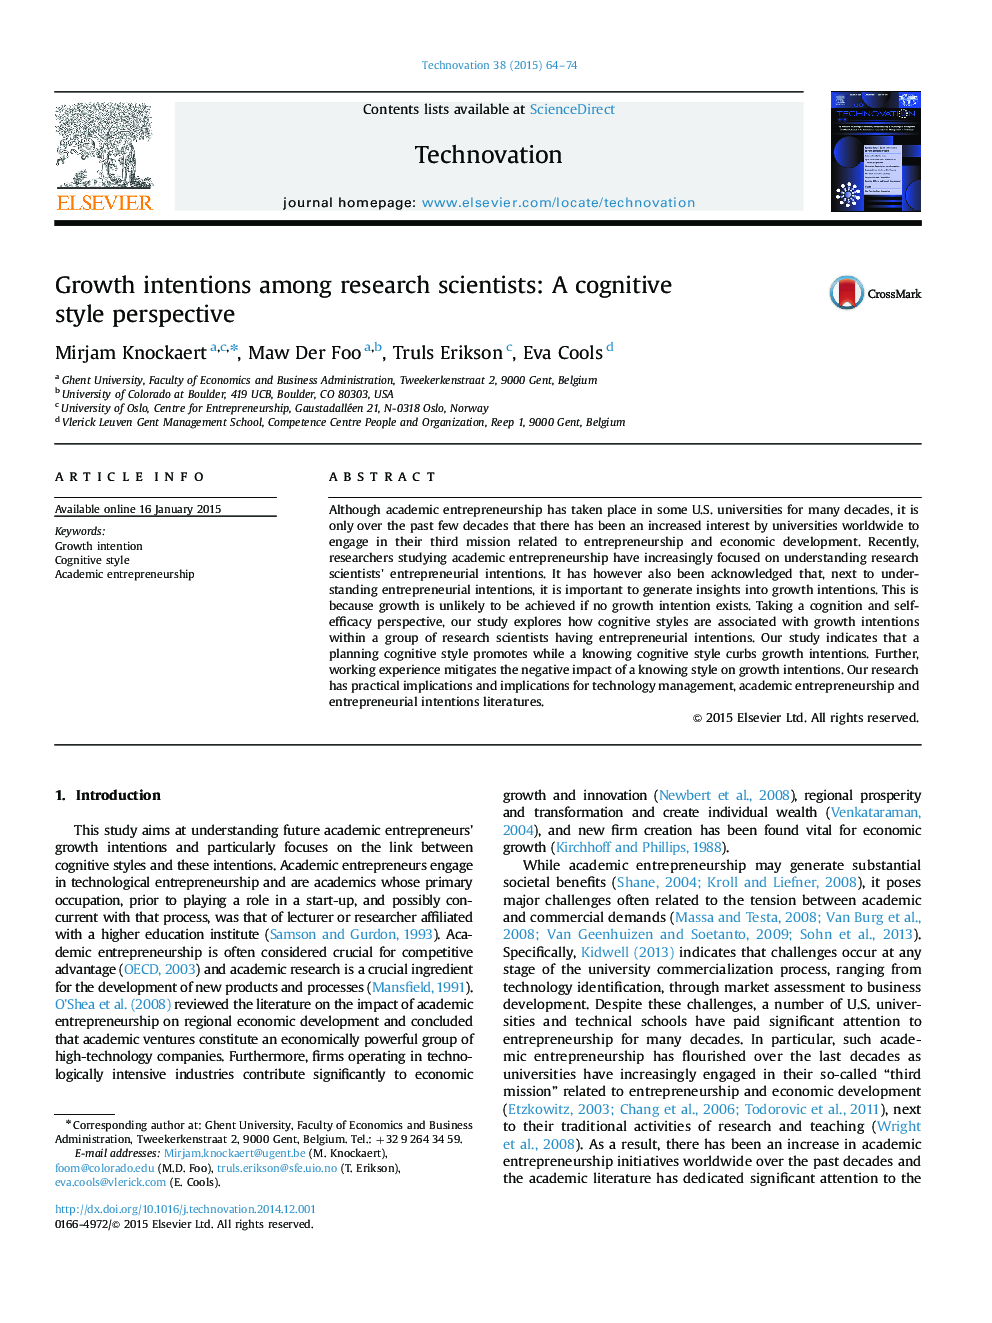 Growth intentions among research scientists: A cognitive style perspective